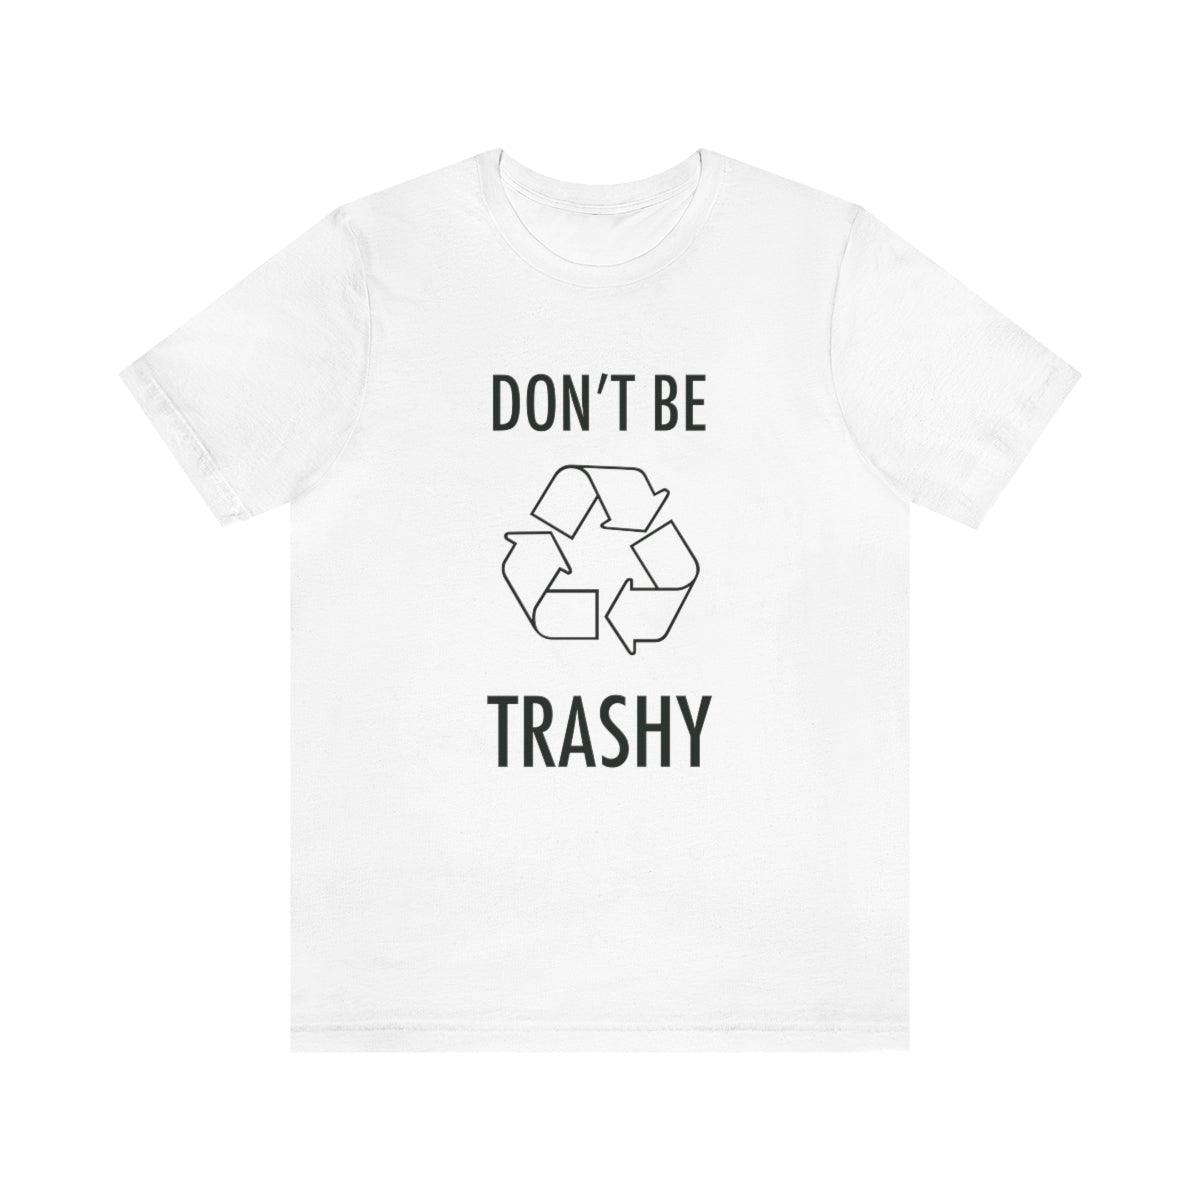 "Don’t Be Trashy" 100% Cotton Jersey Short Sleeve T-Shirt - Melomys